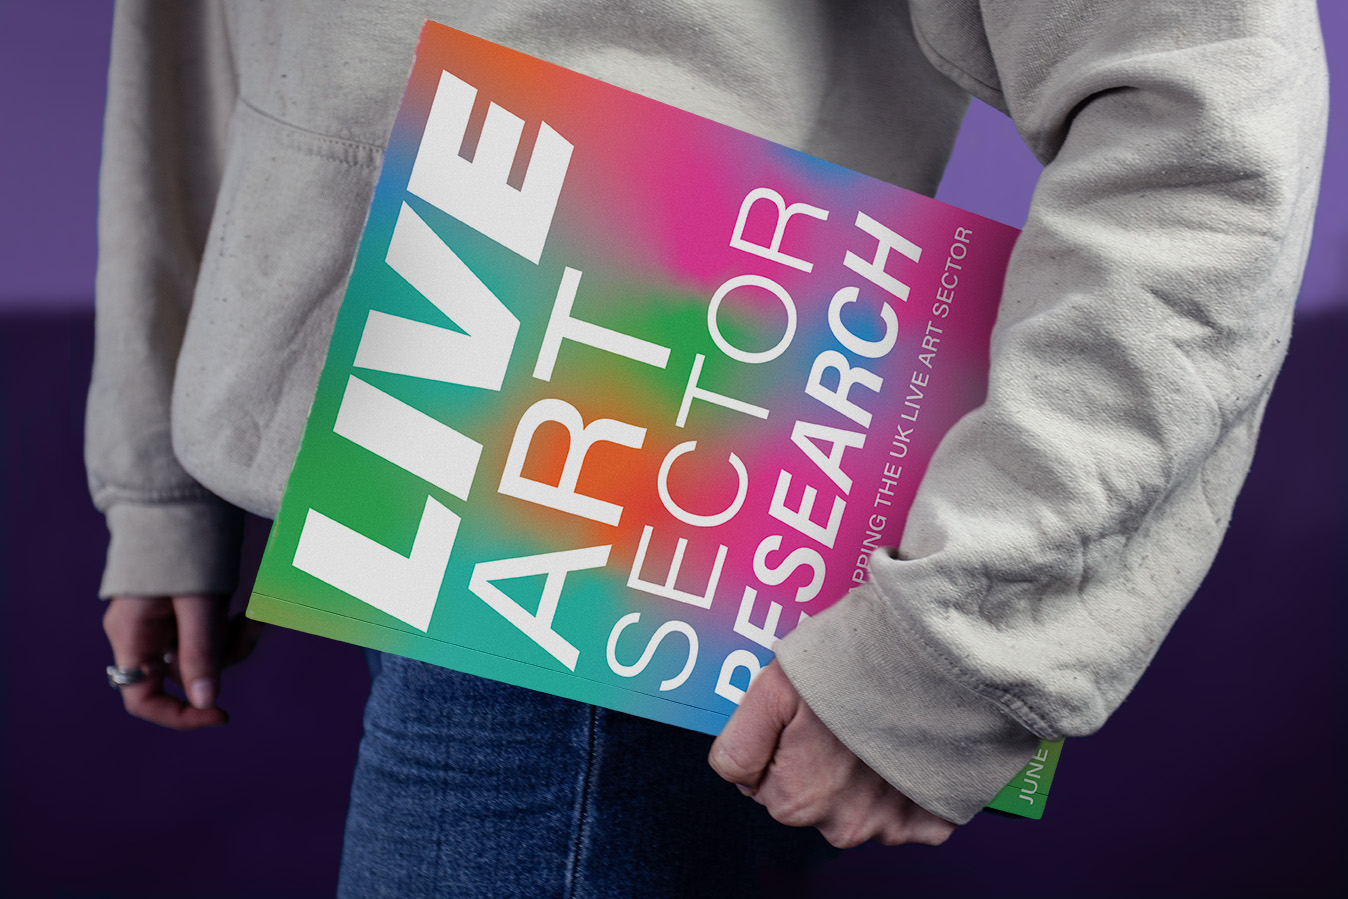 alt: A woman holding the Live Art Sector Research book. The front cover uses multiple font weights and bright gradients to catch the eye